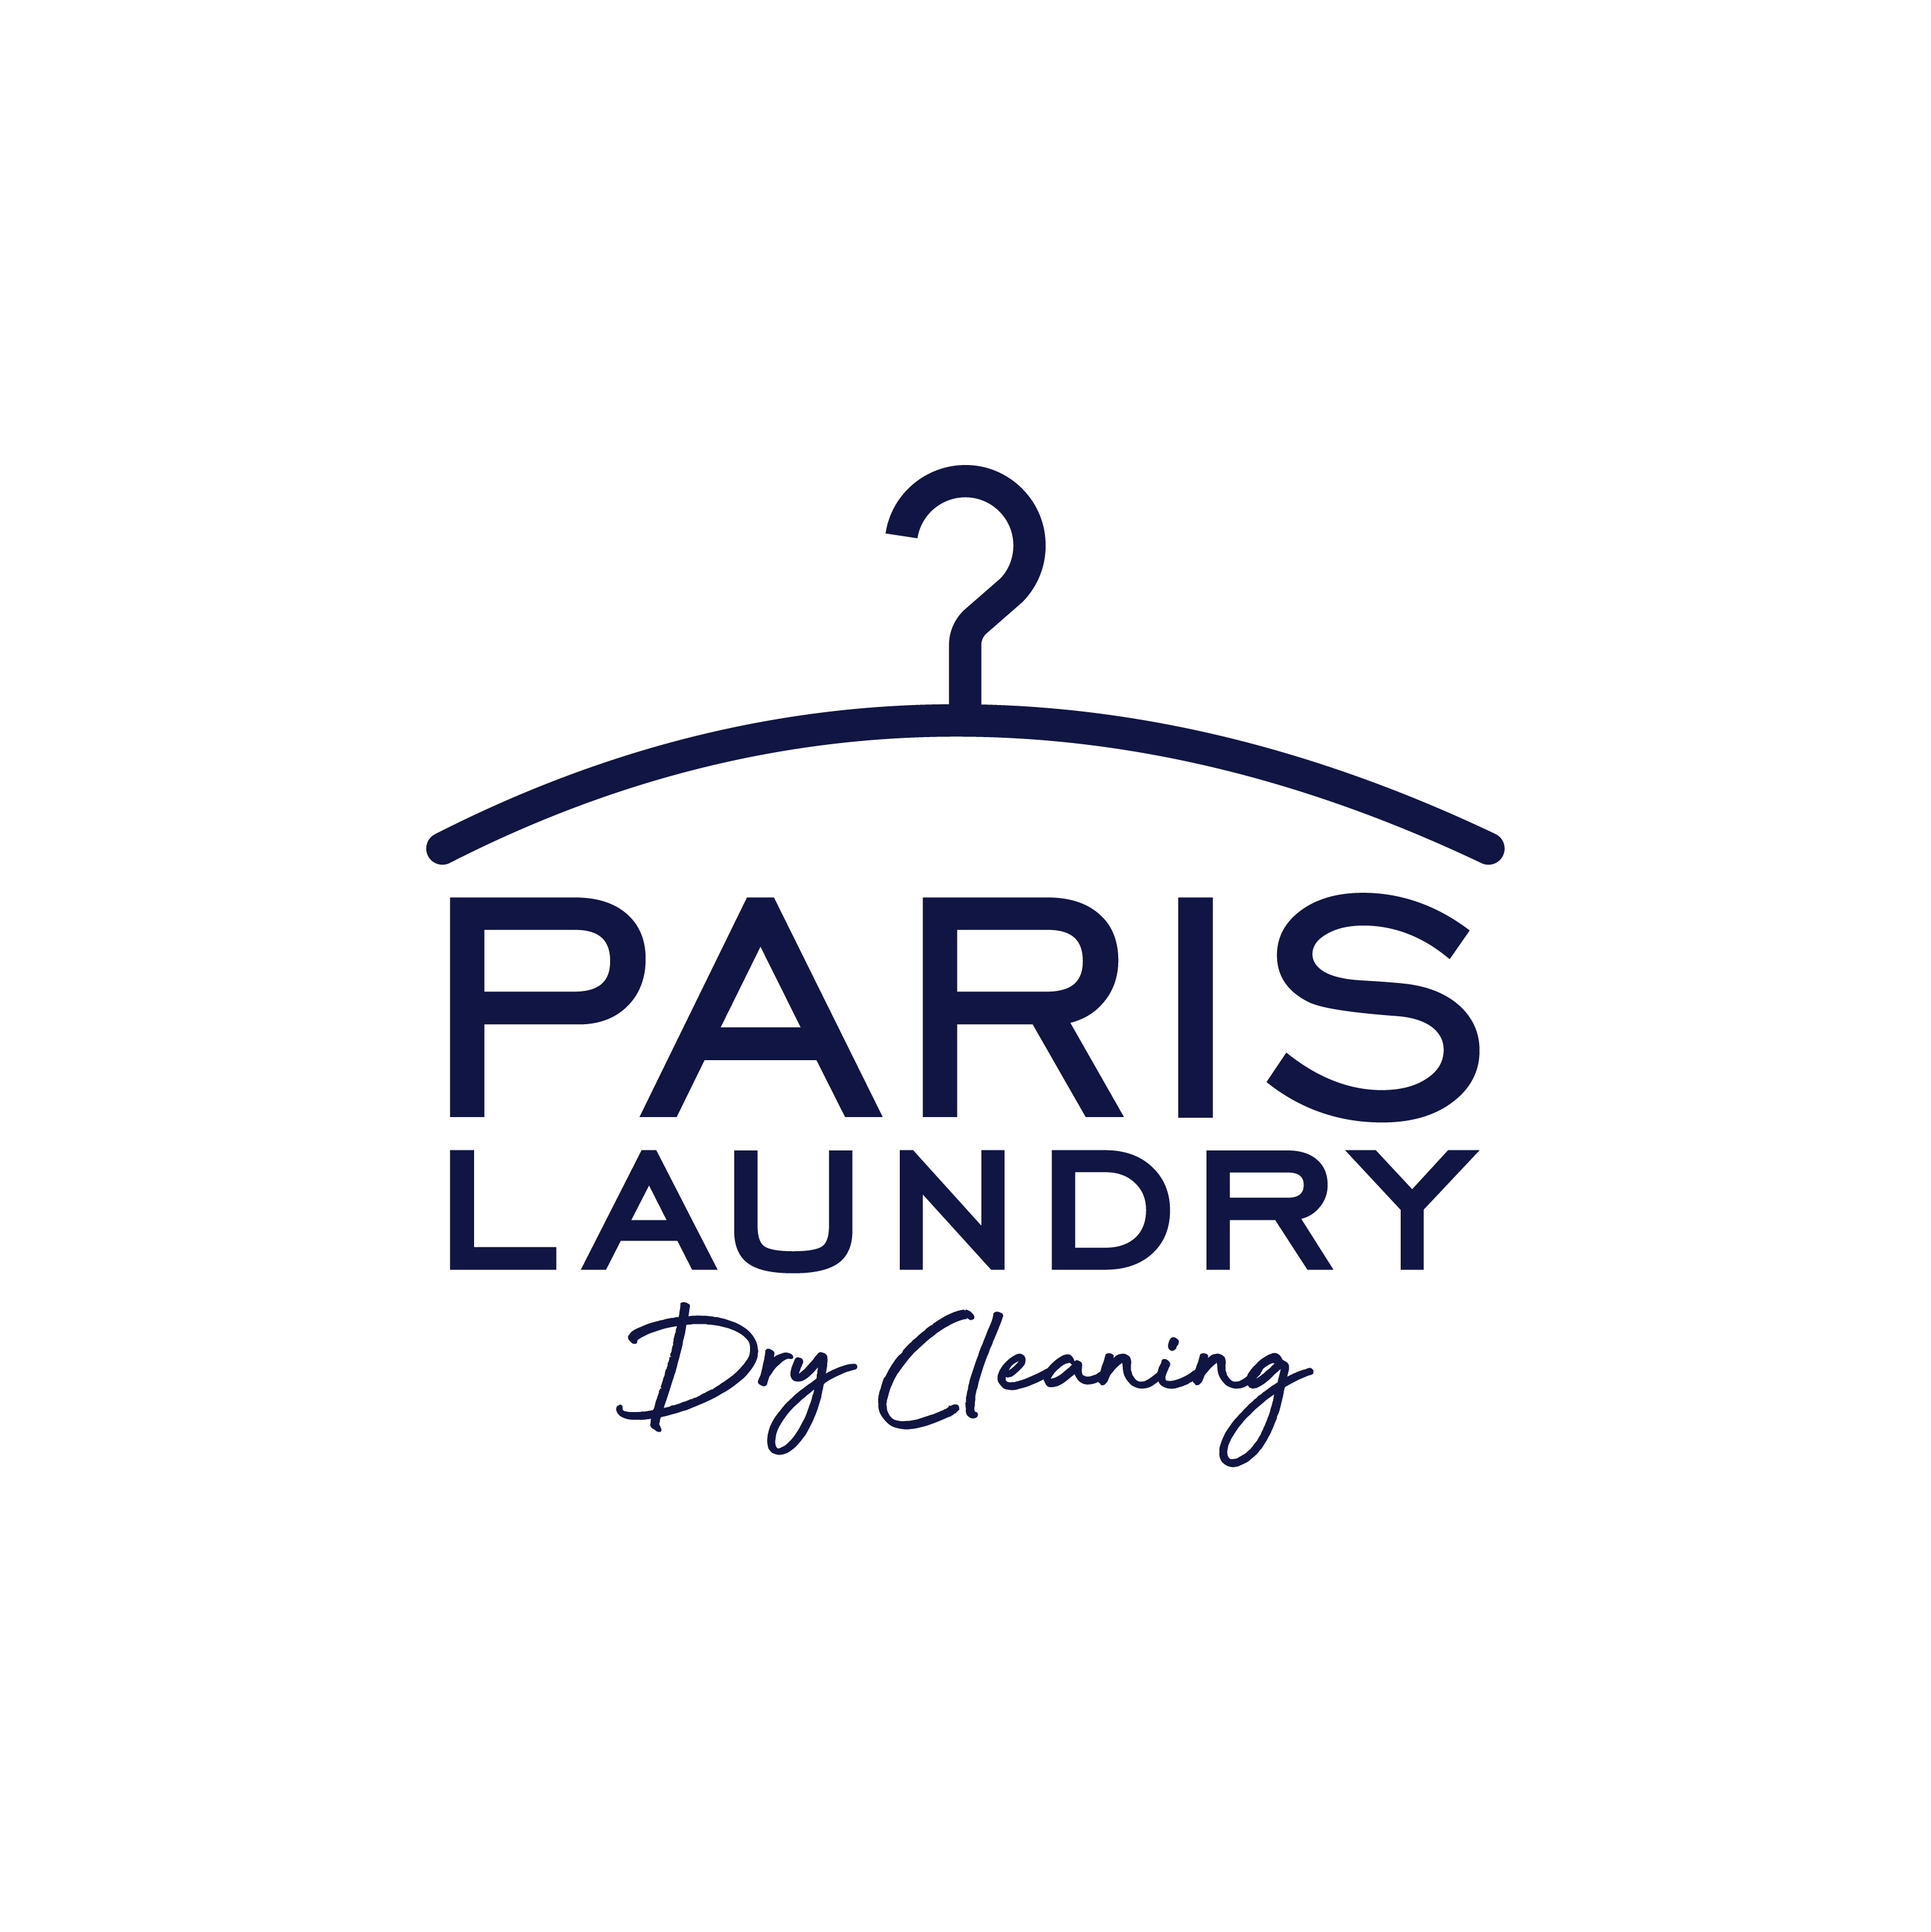 Paris Laundry Dry Cleaning